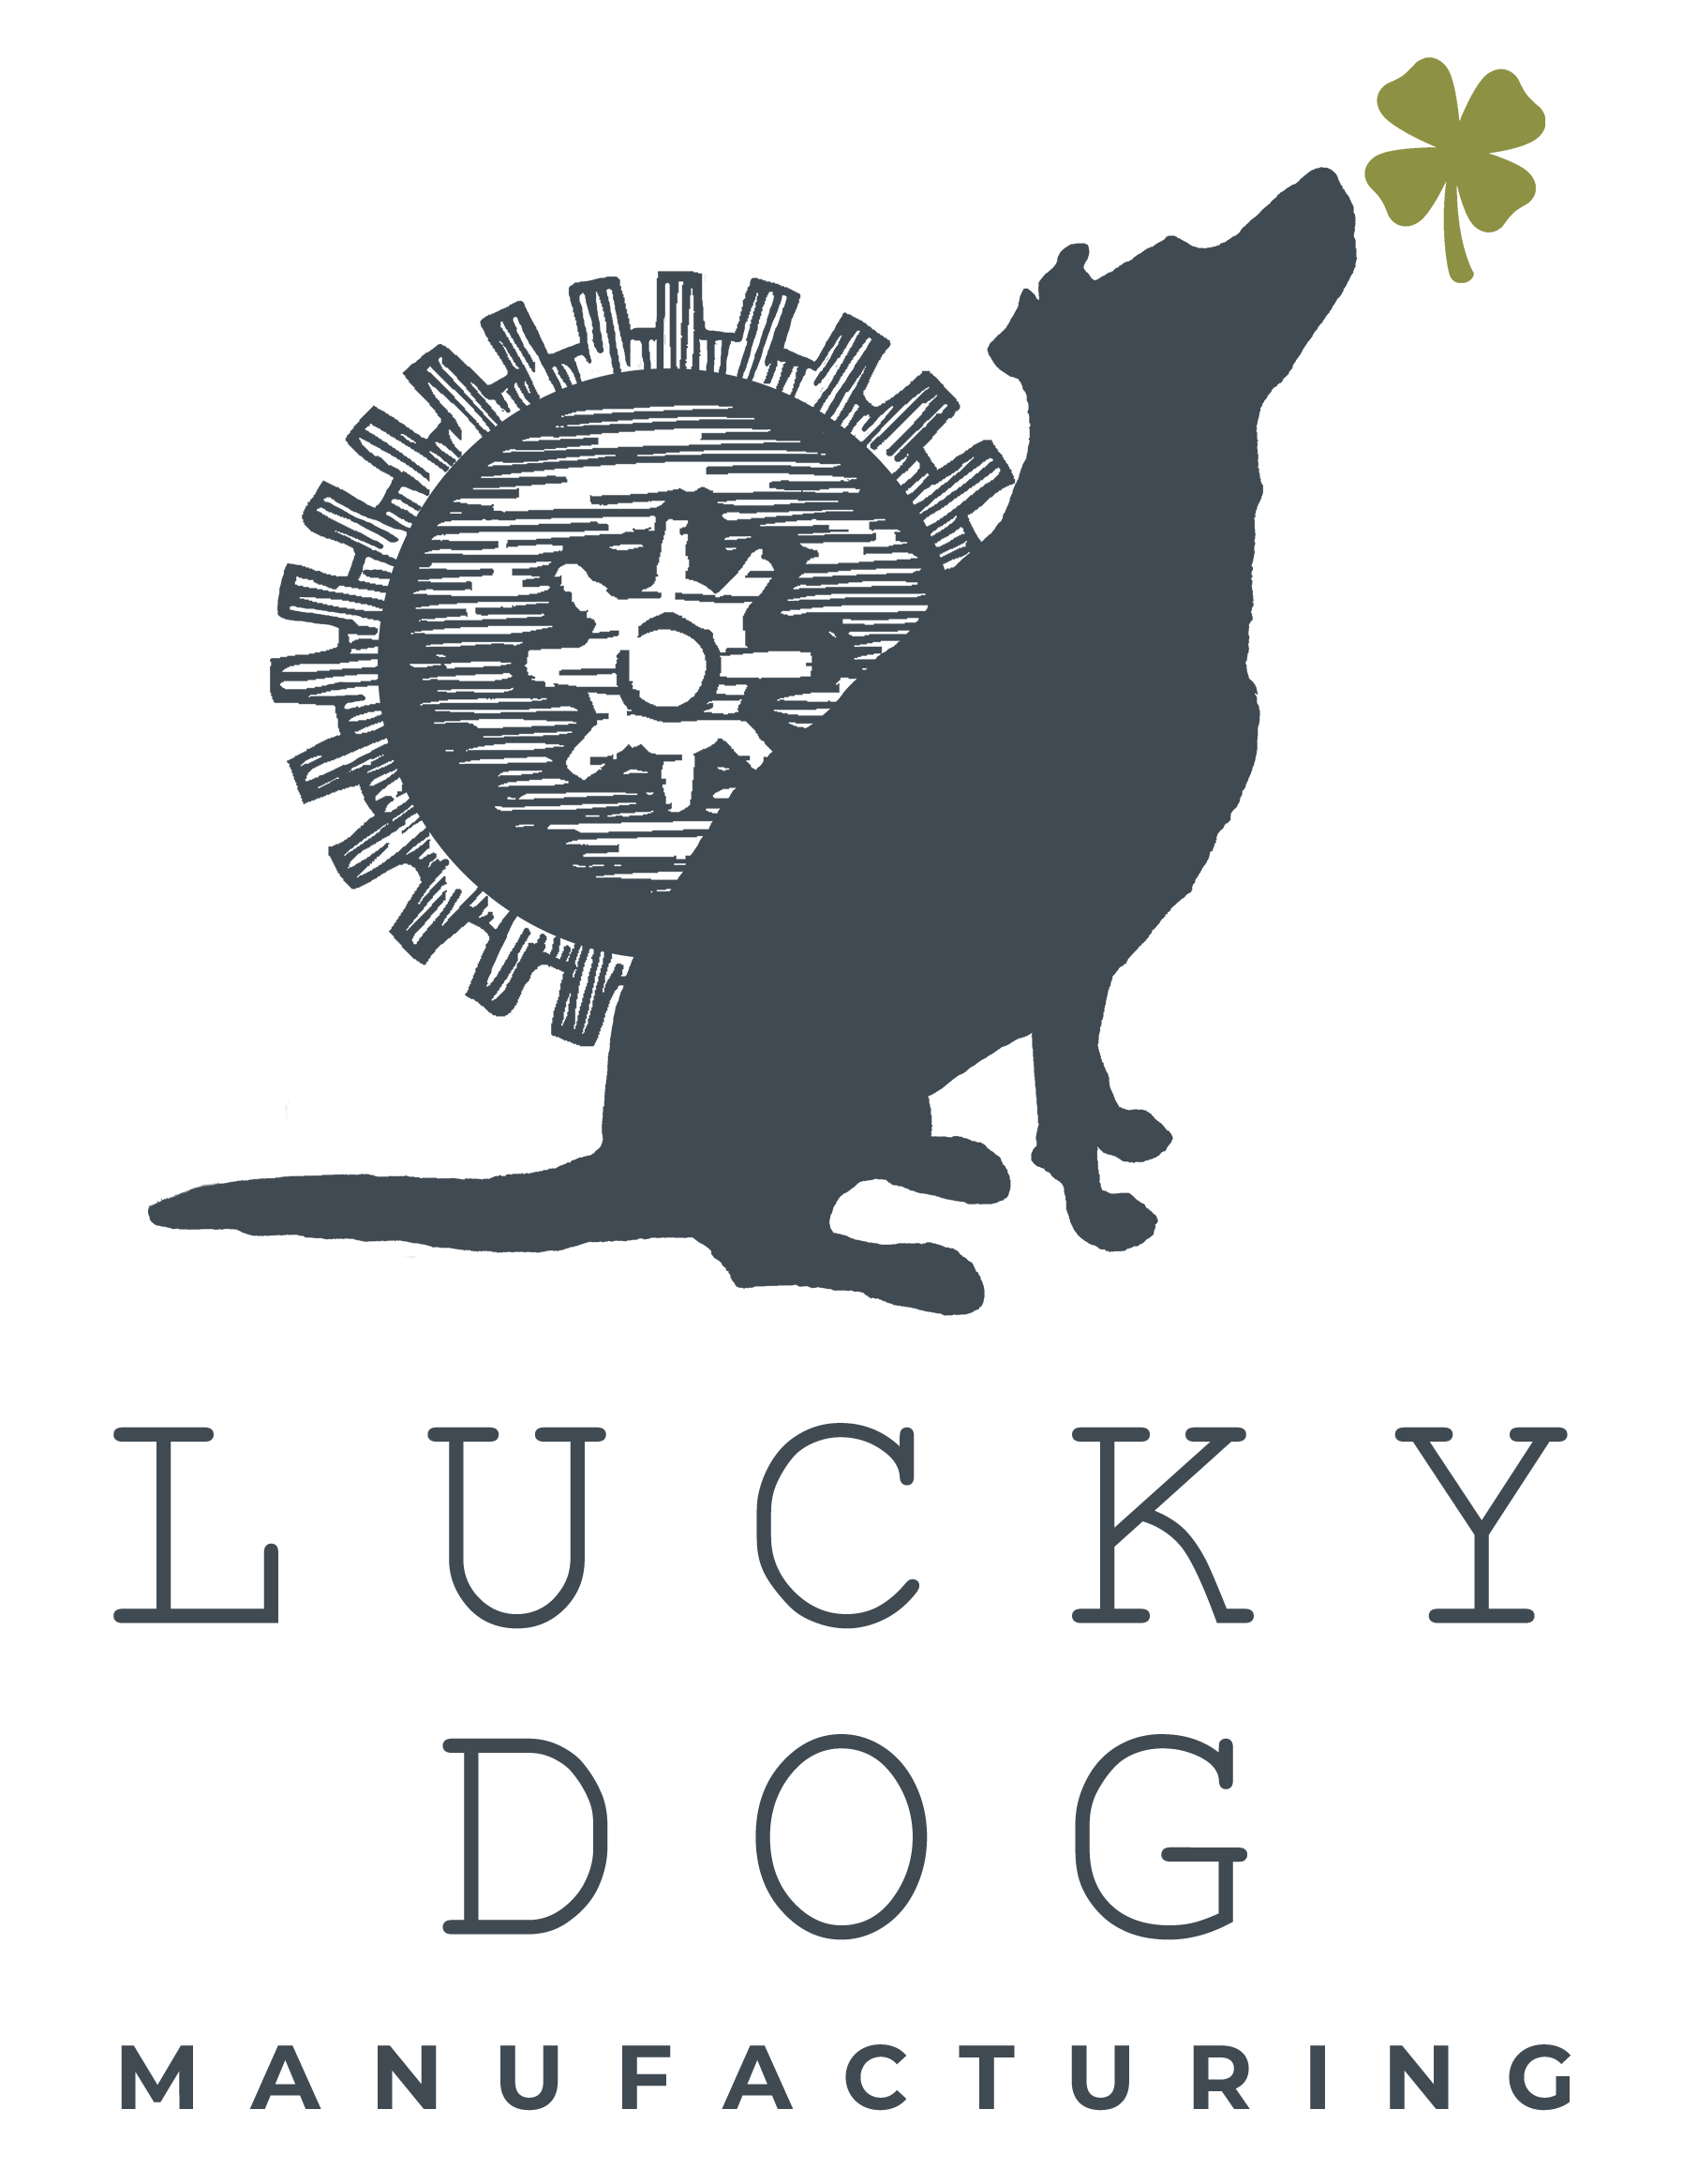 Lucky Dog Manufacturing